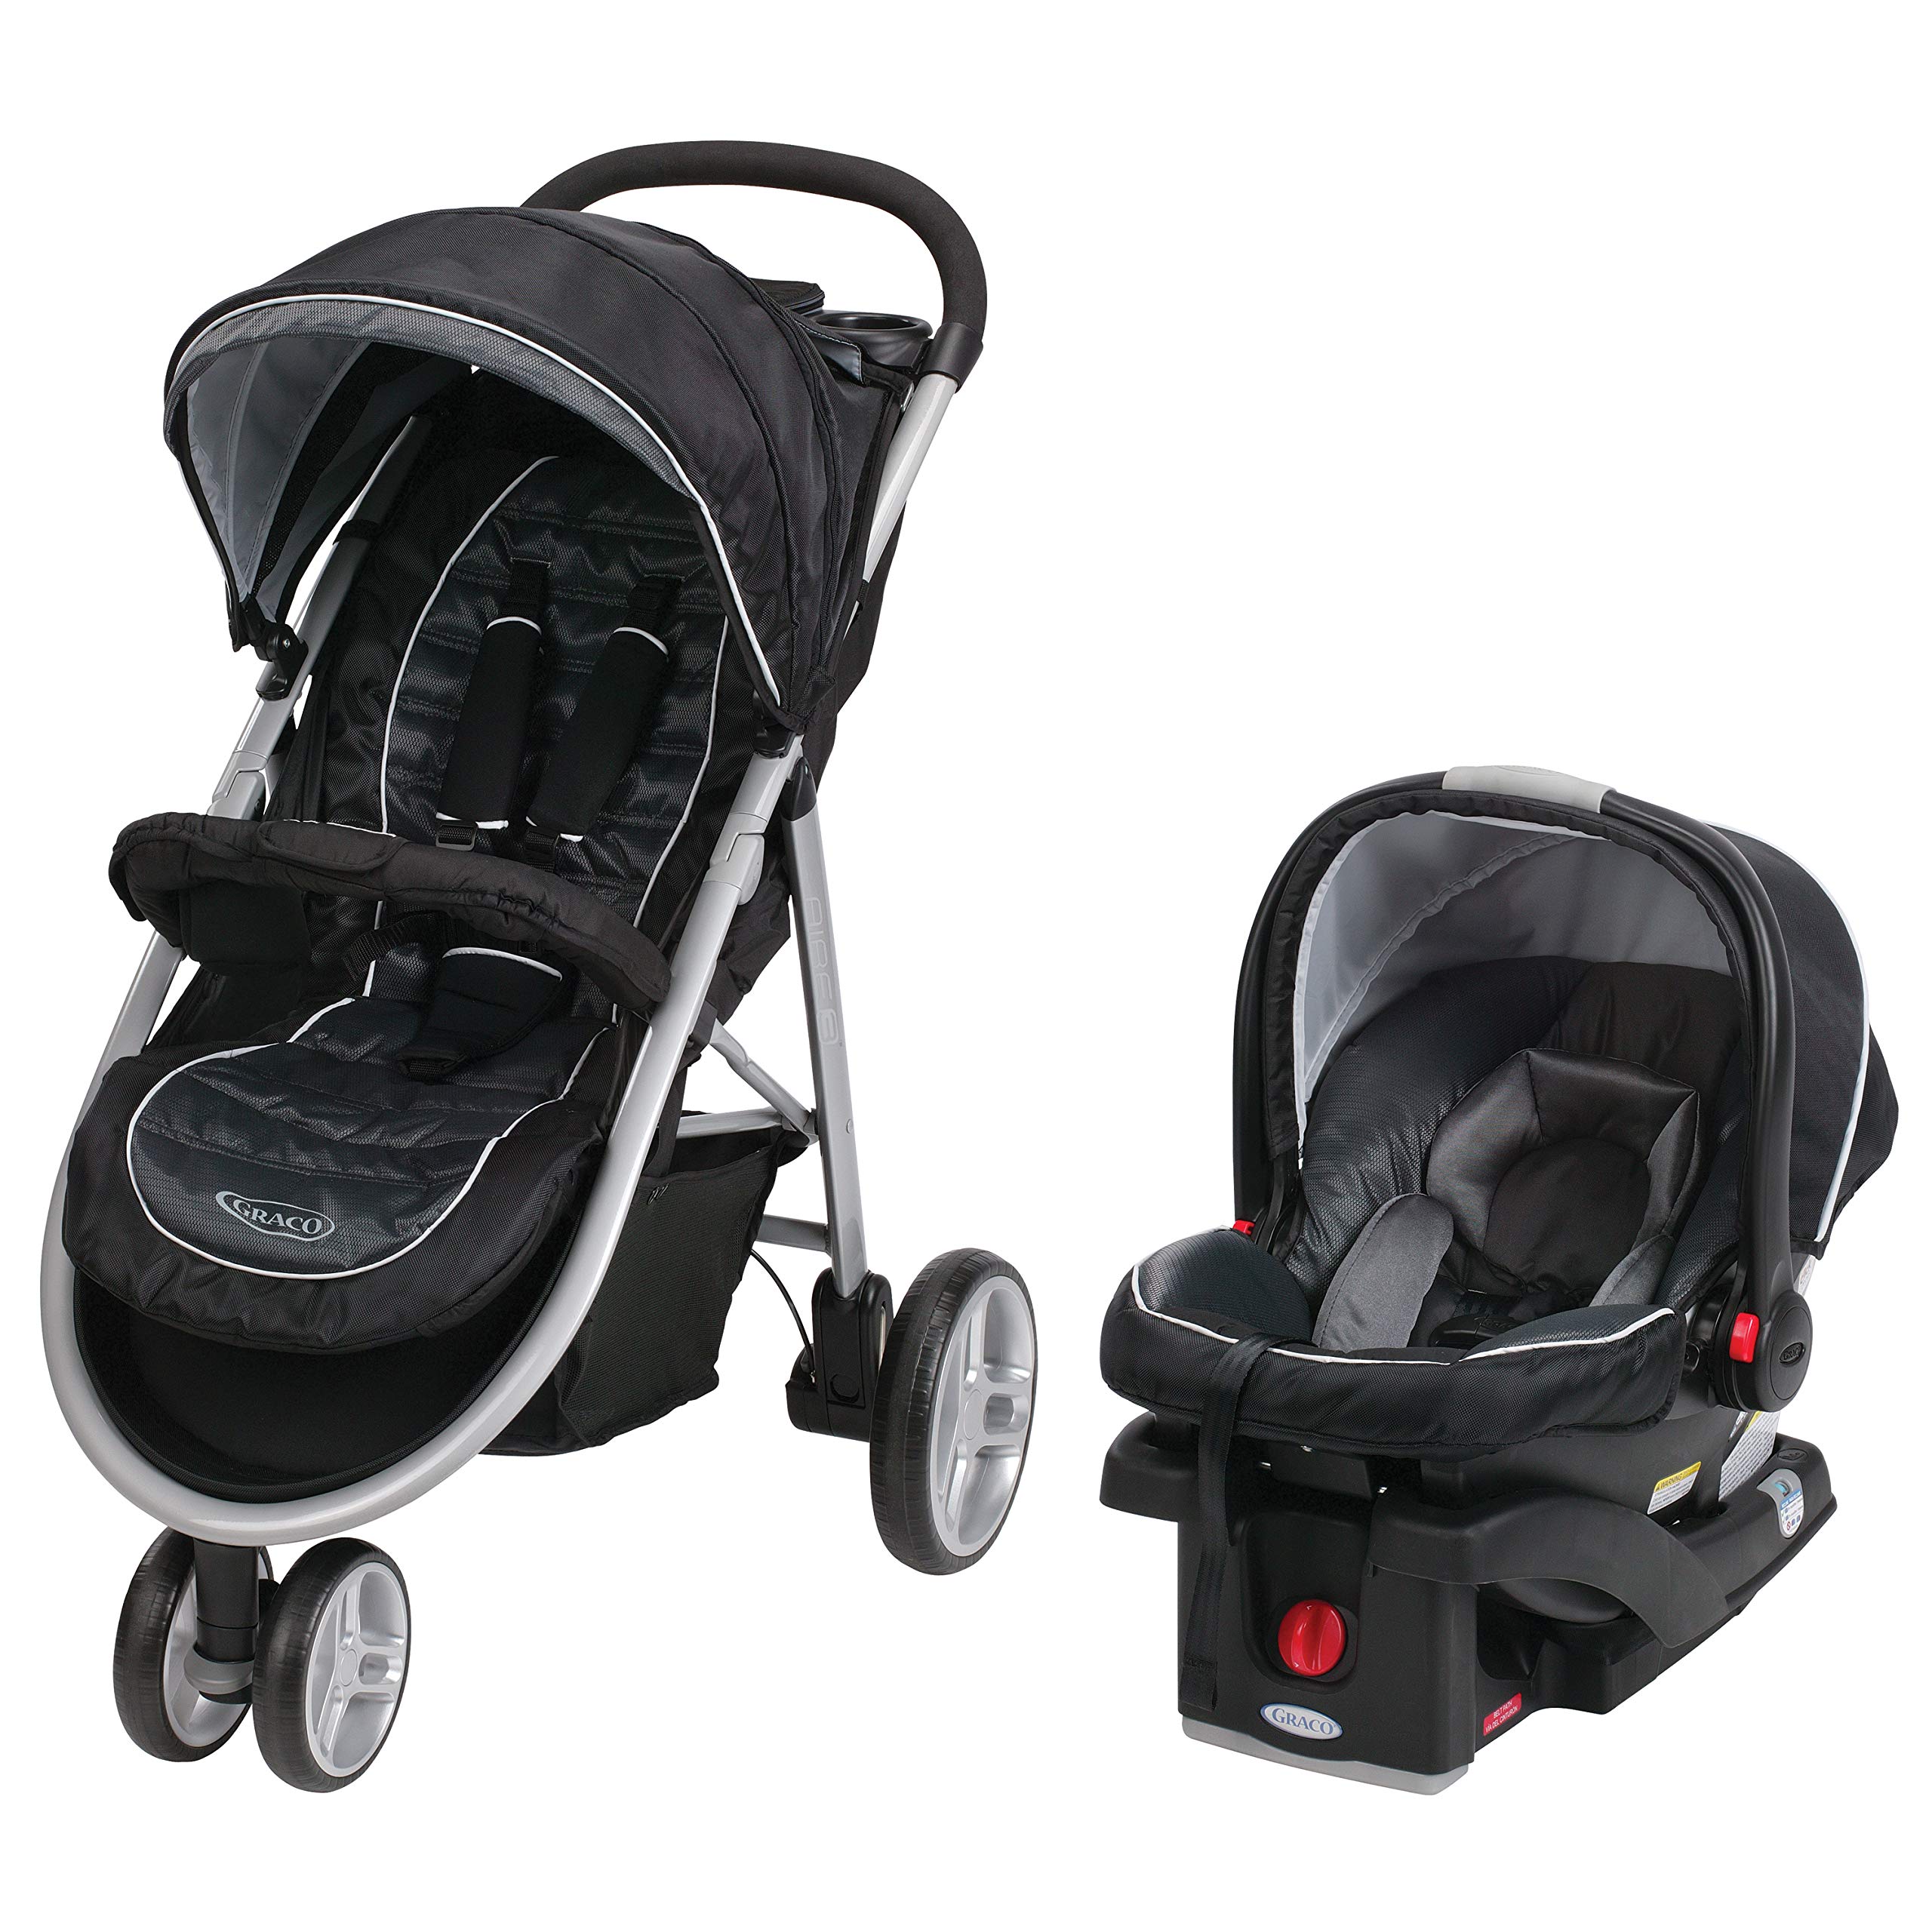 Graco Aire3 Travel System (Stroller and Car Seat), Gotham